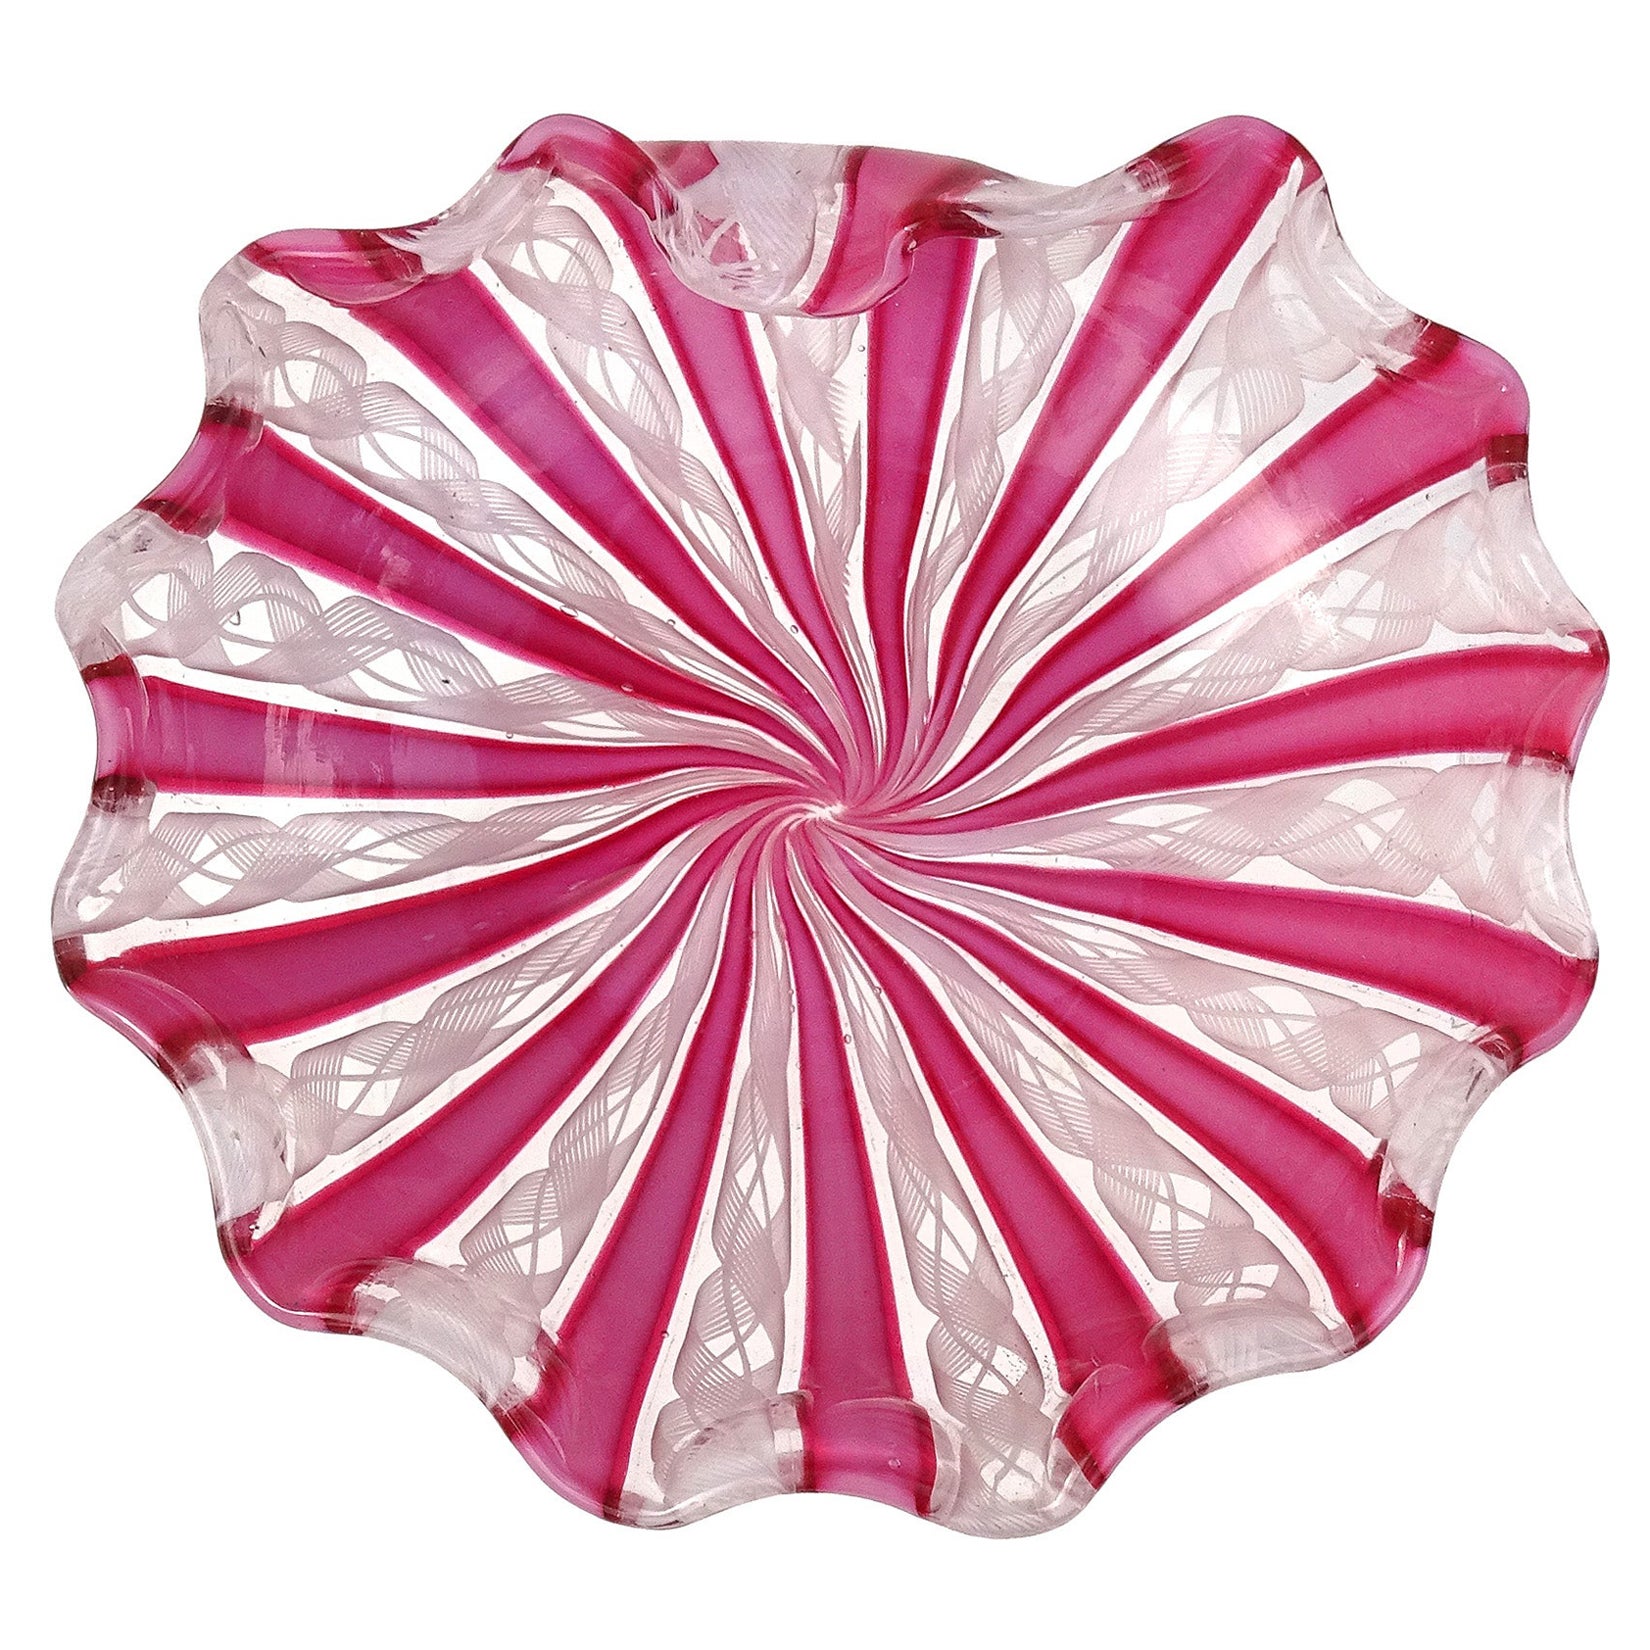 Fratelli Toso Murano Pink White Ribbons Italian Art Glass Decorative Dish Bowl For Sale